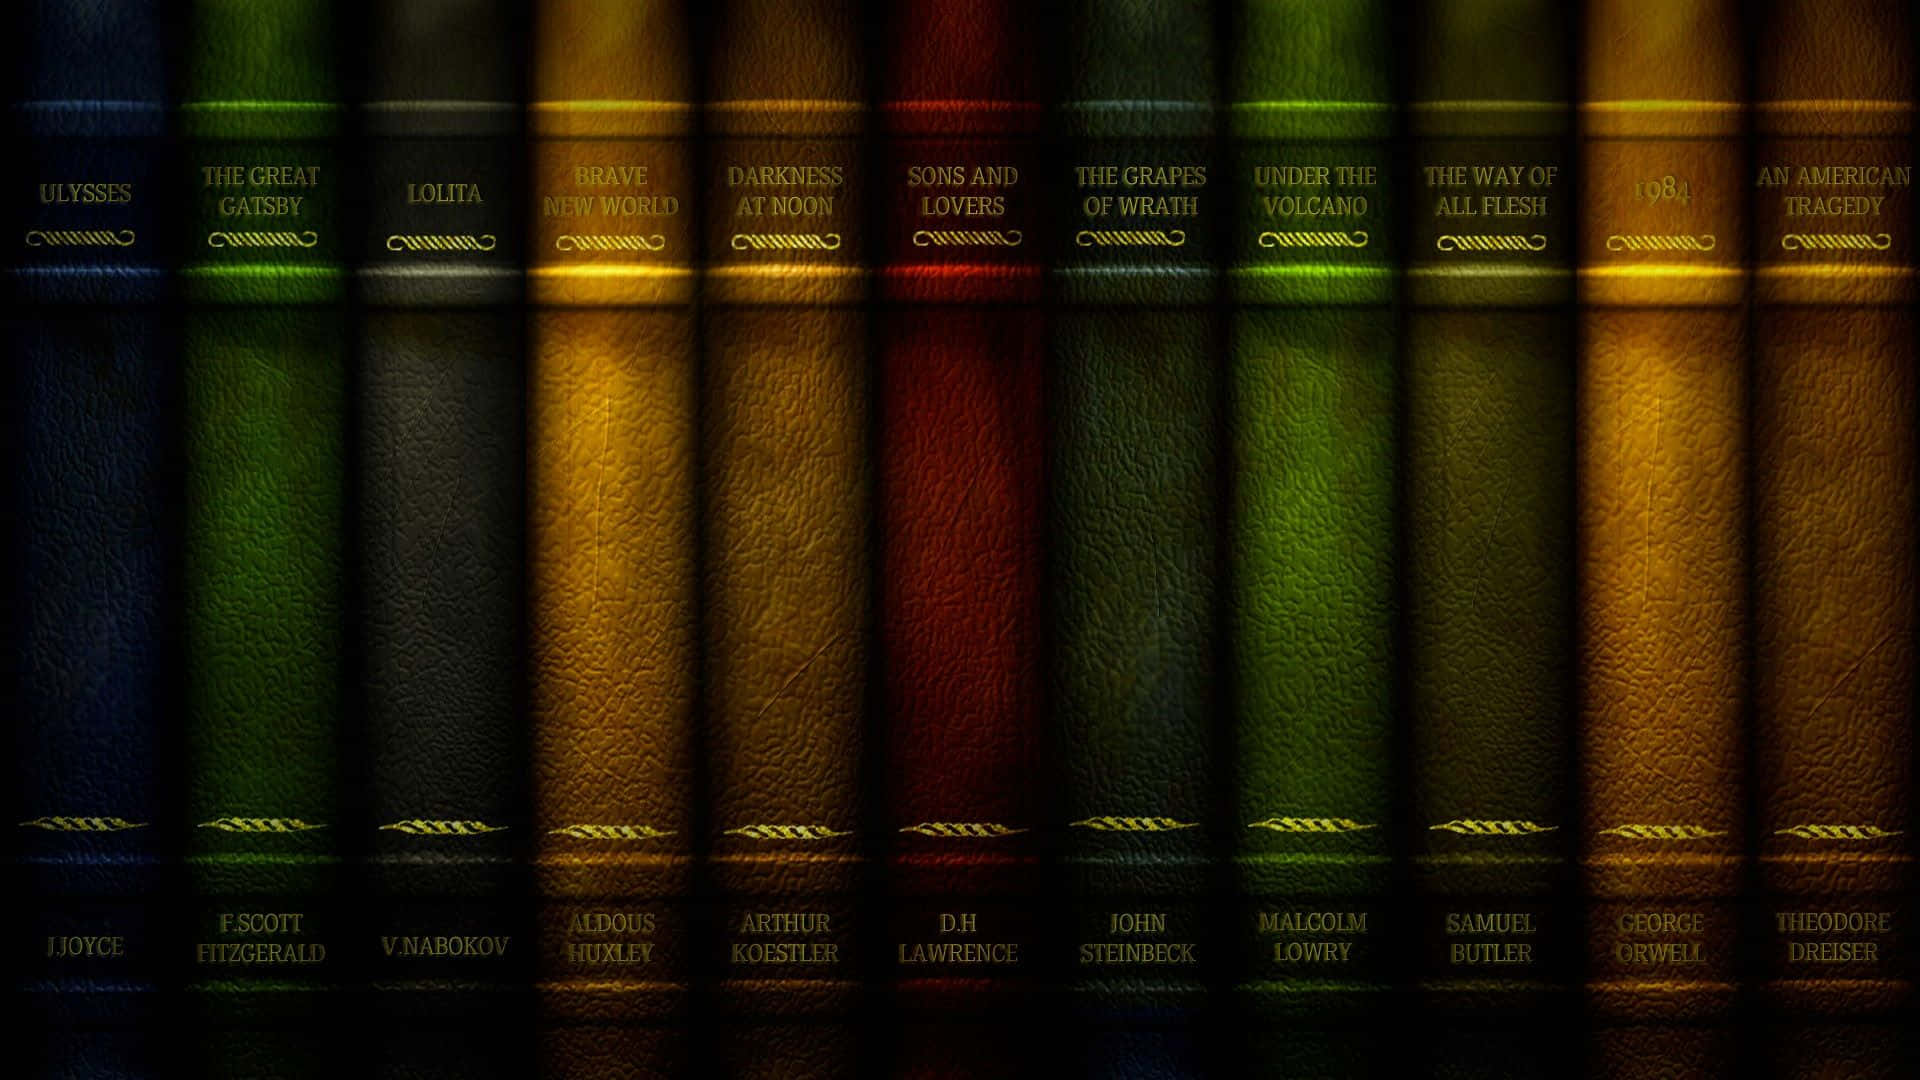 Download A Row Of Colorful Books On A Dark Background | Wallpapers.com